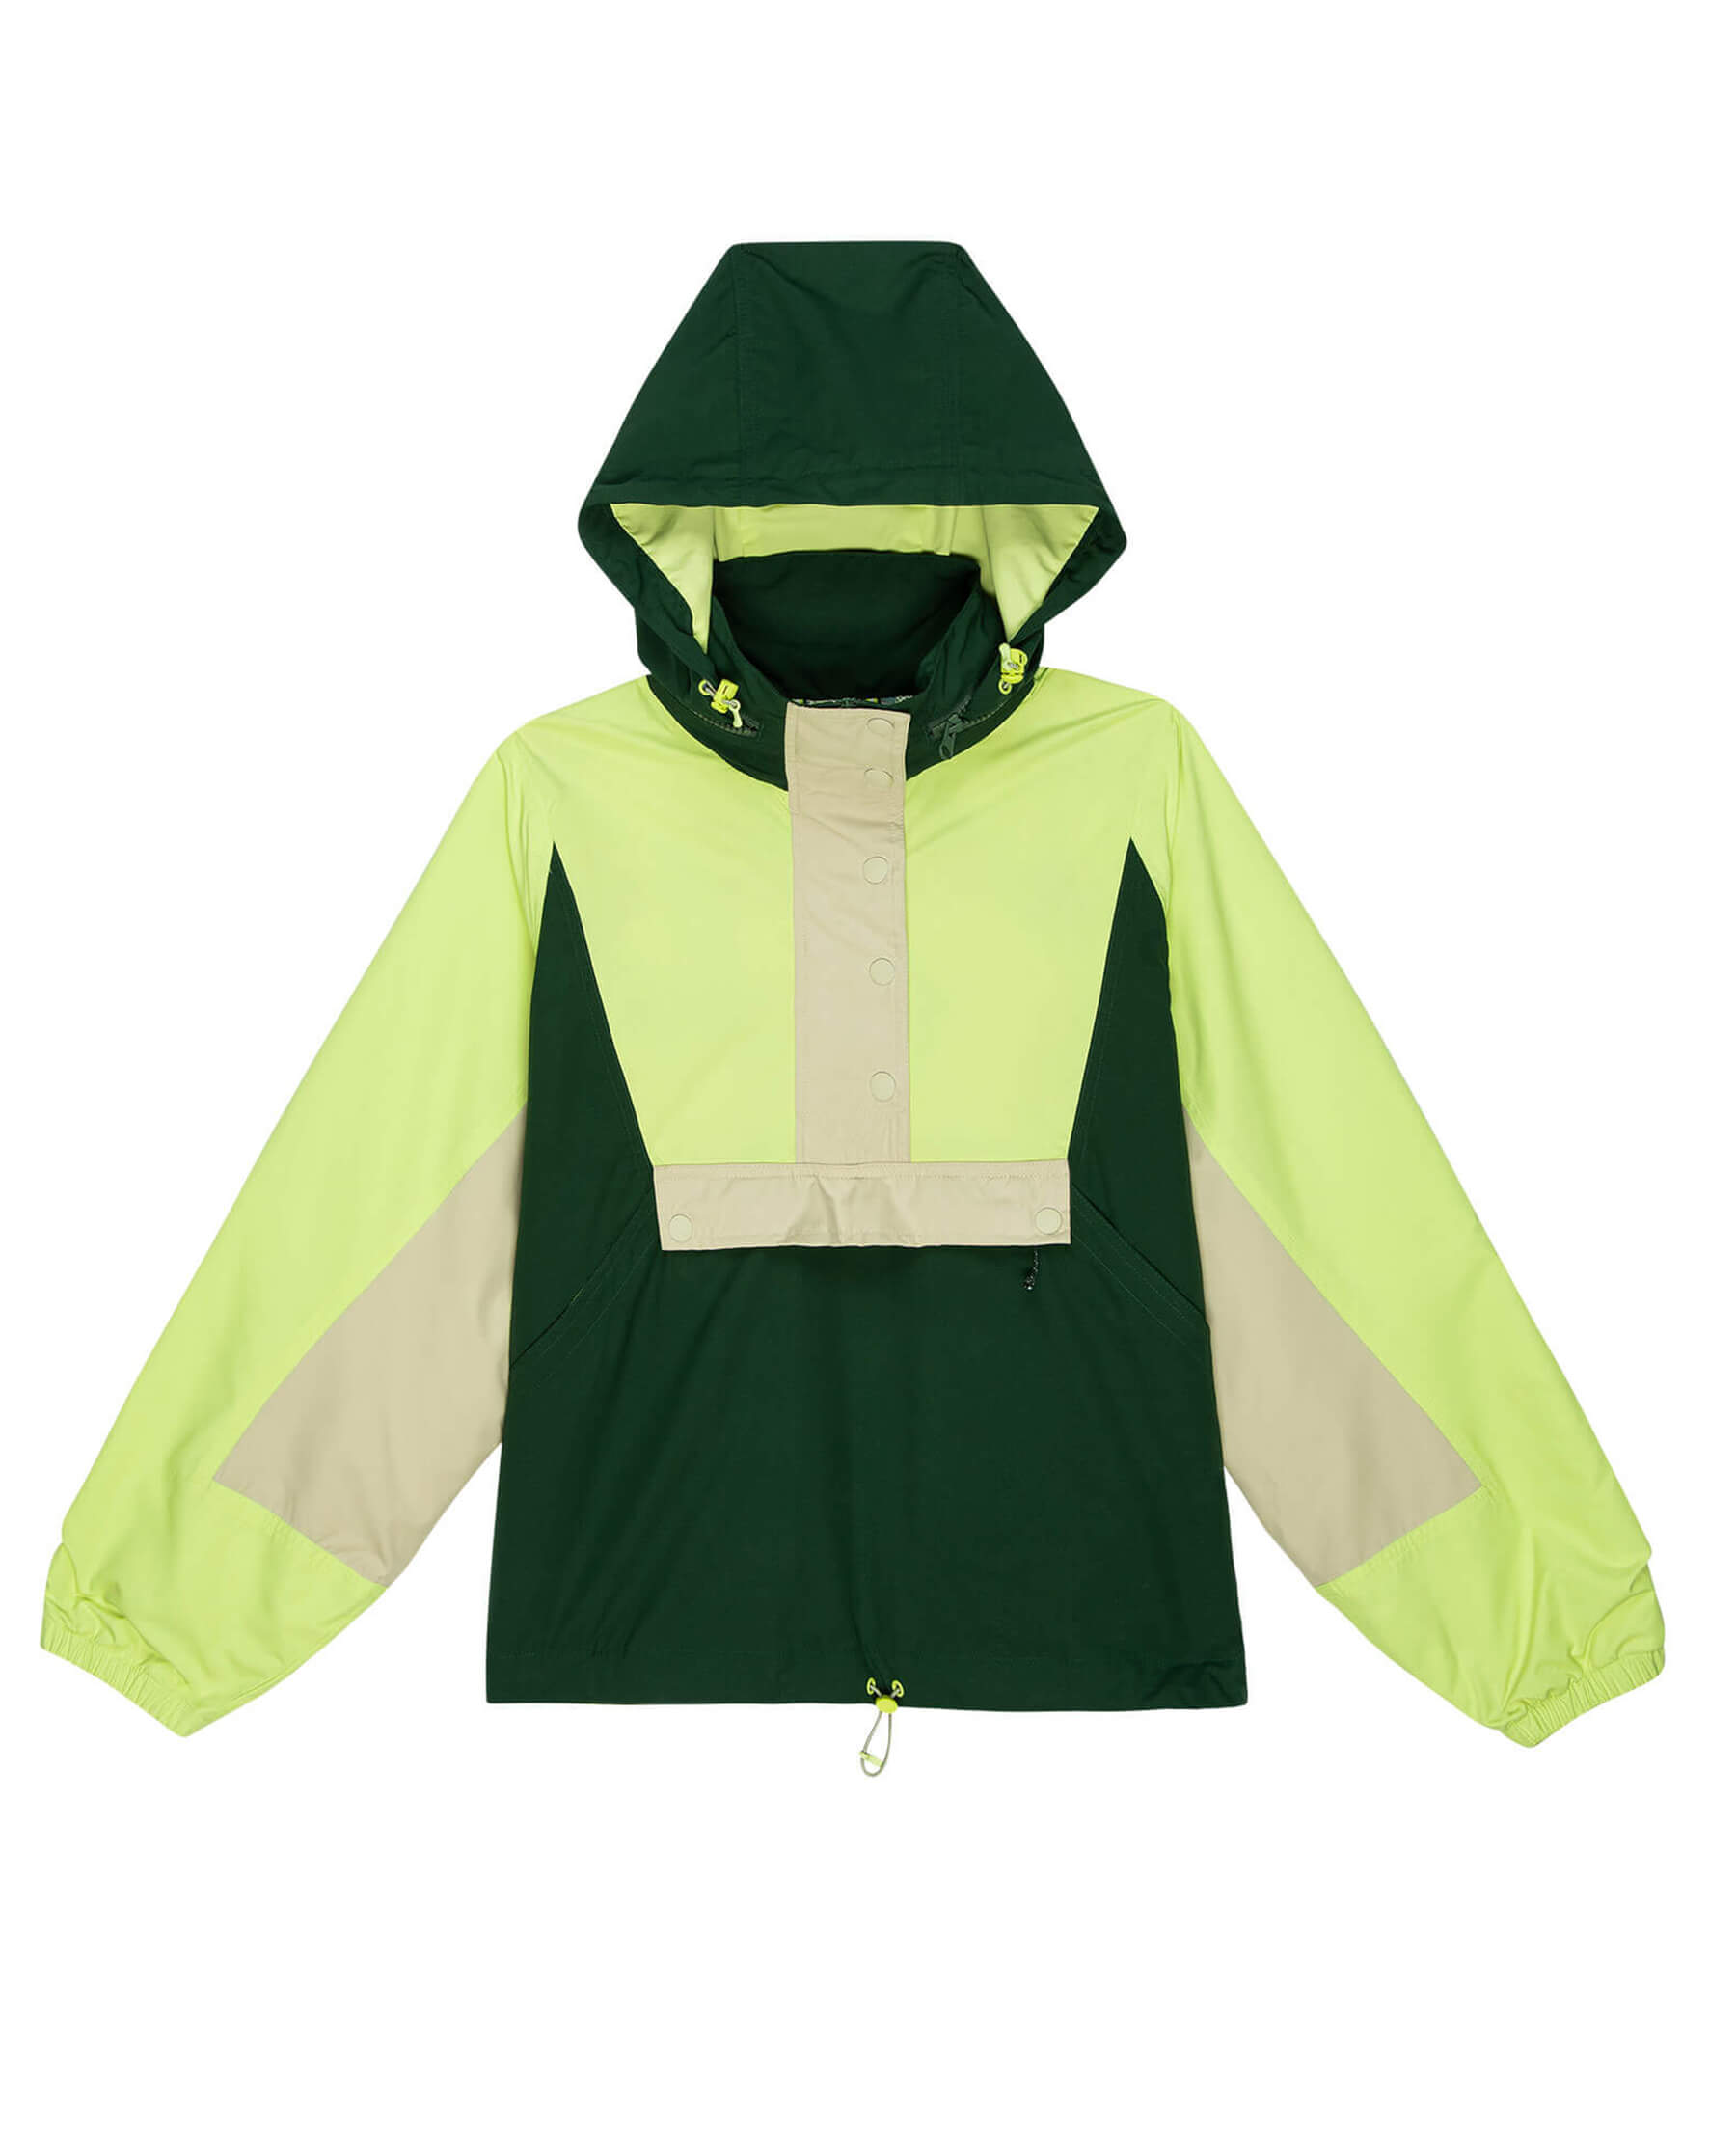 The Crestline Pullover. -- Moss and Citron Colorblock JACKET THE GREAT. SP24 TGO SALE